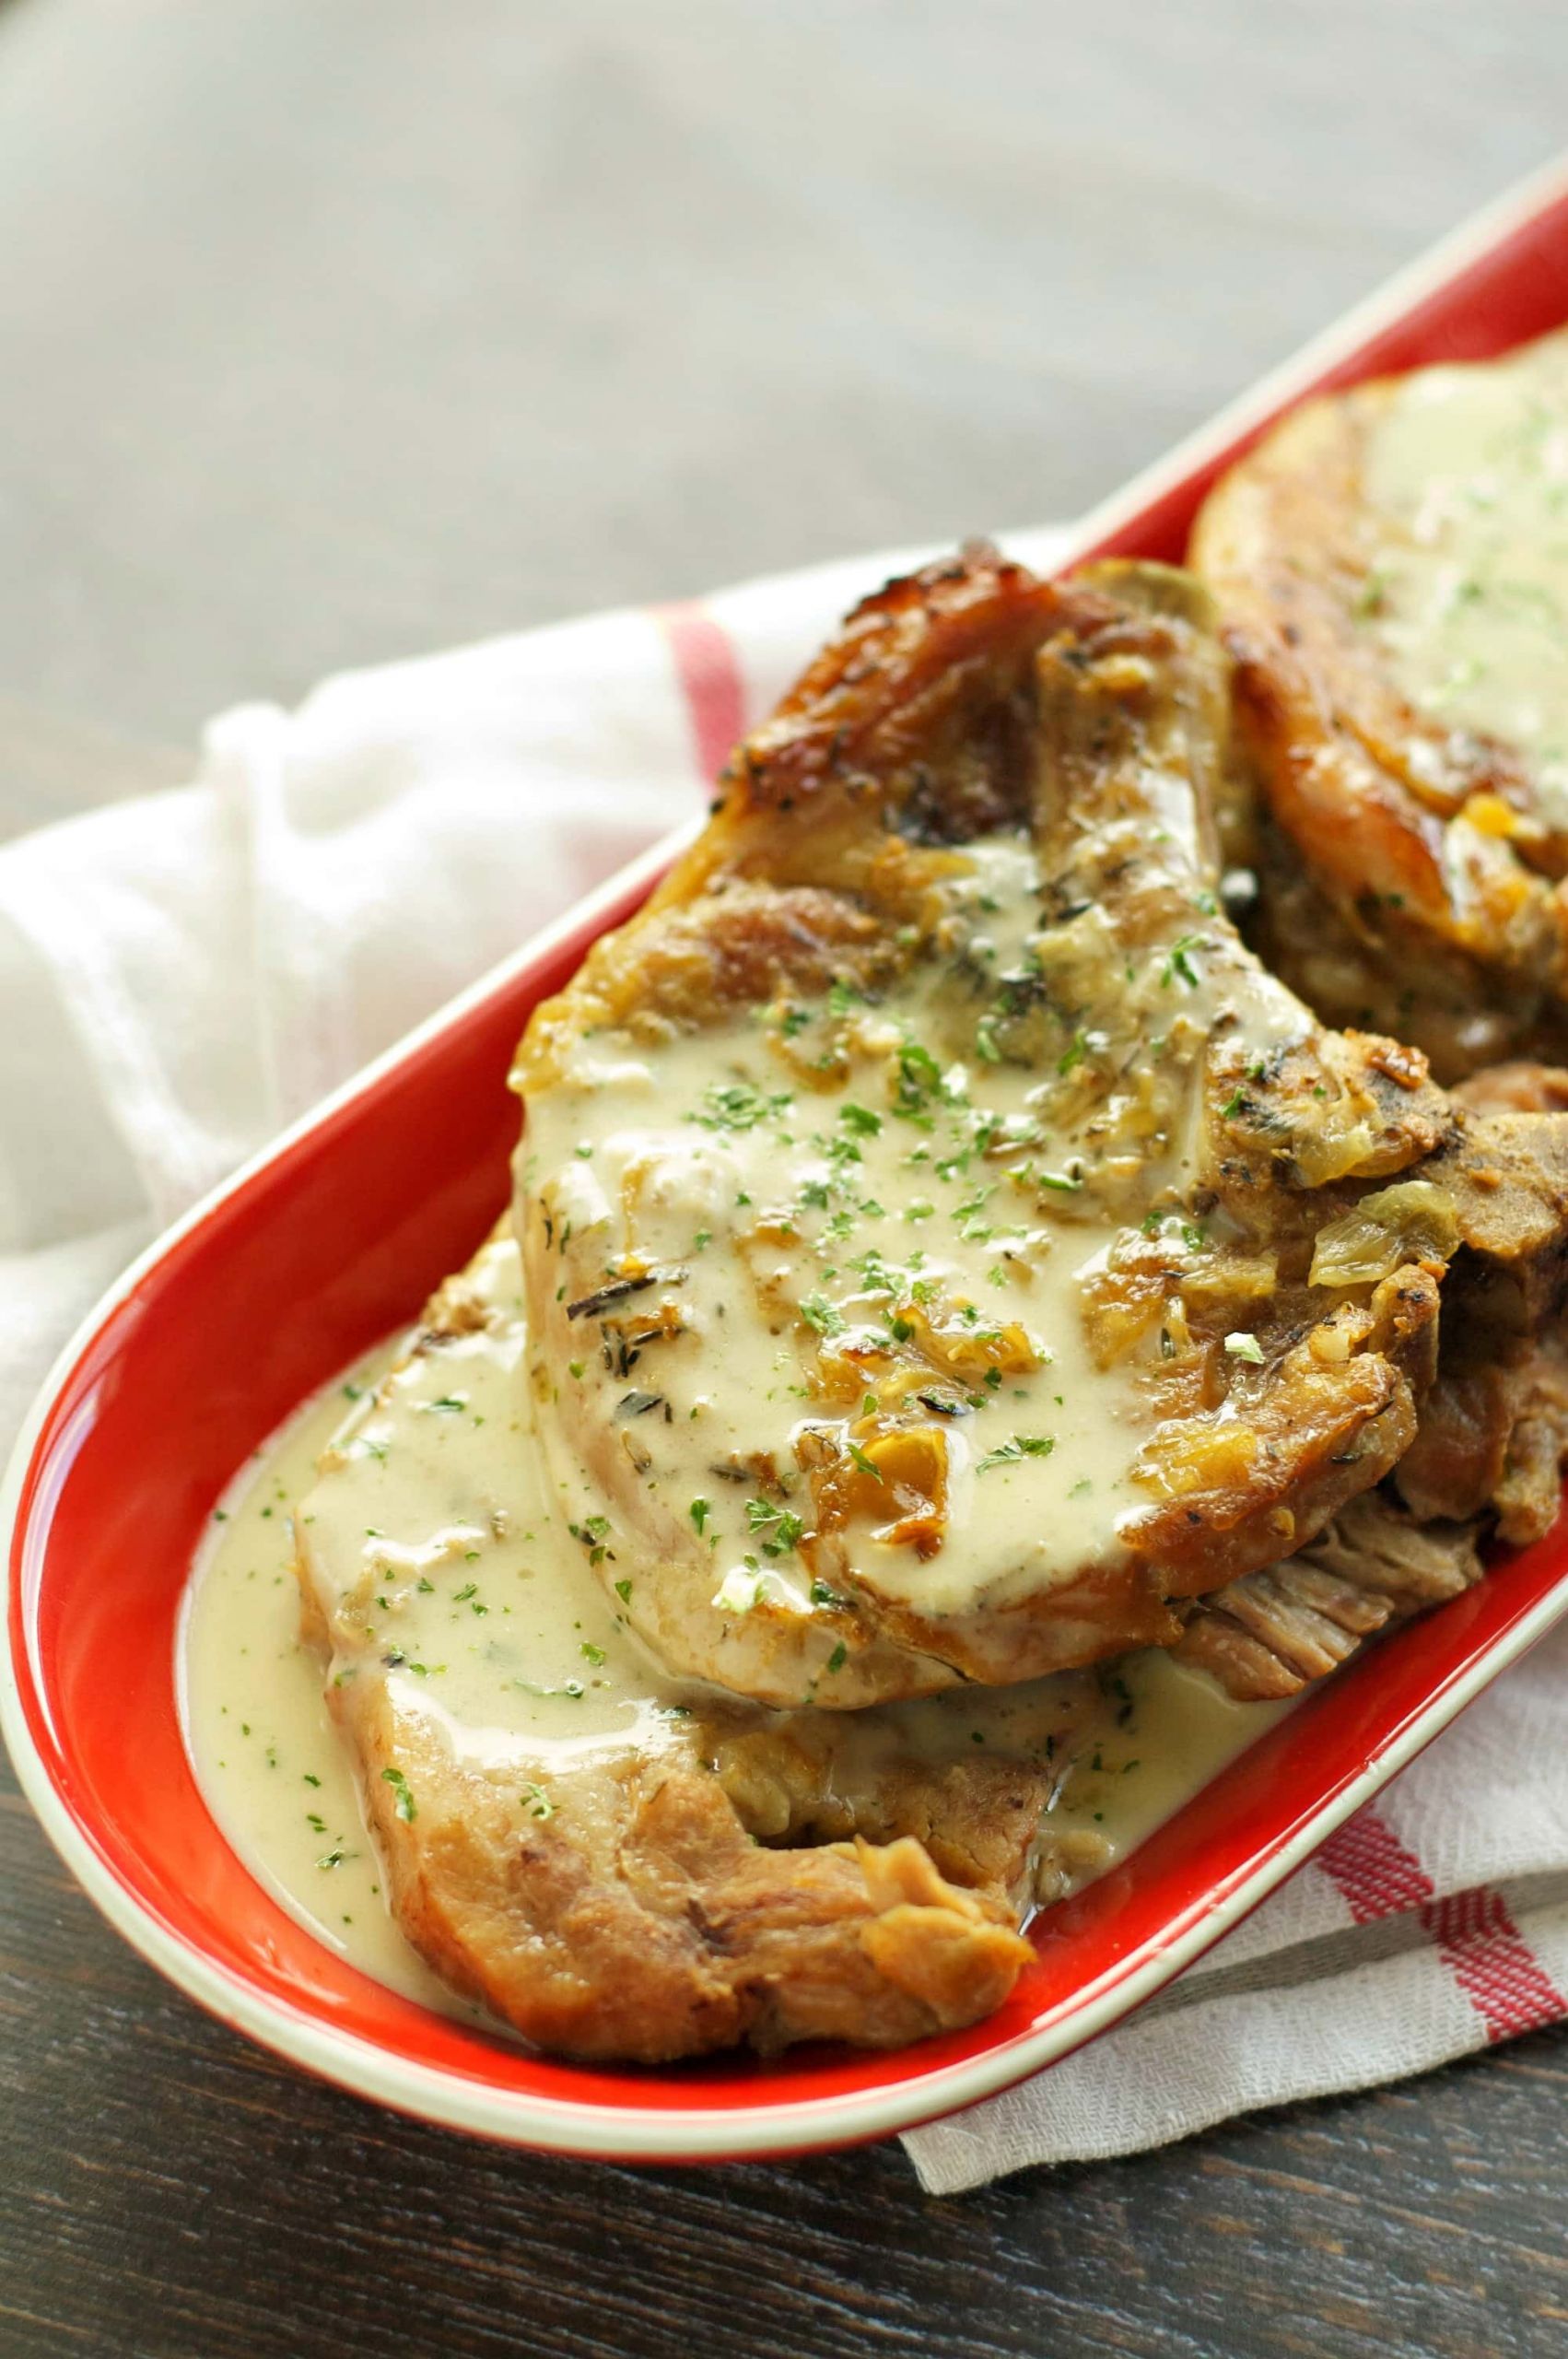 Gourmet Pork Chops
 Slow Cooker Pork Chops with Creamy Herb Sauce Slow